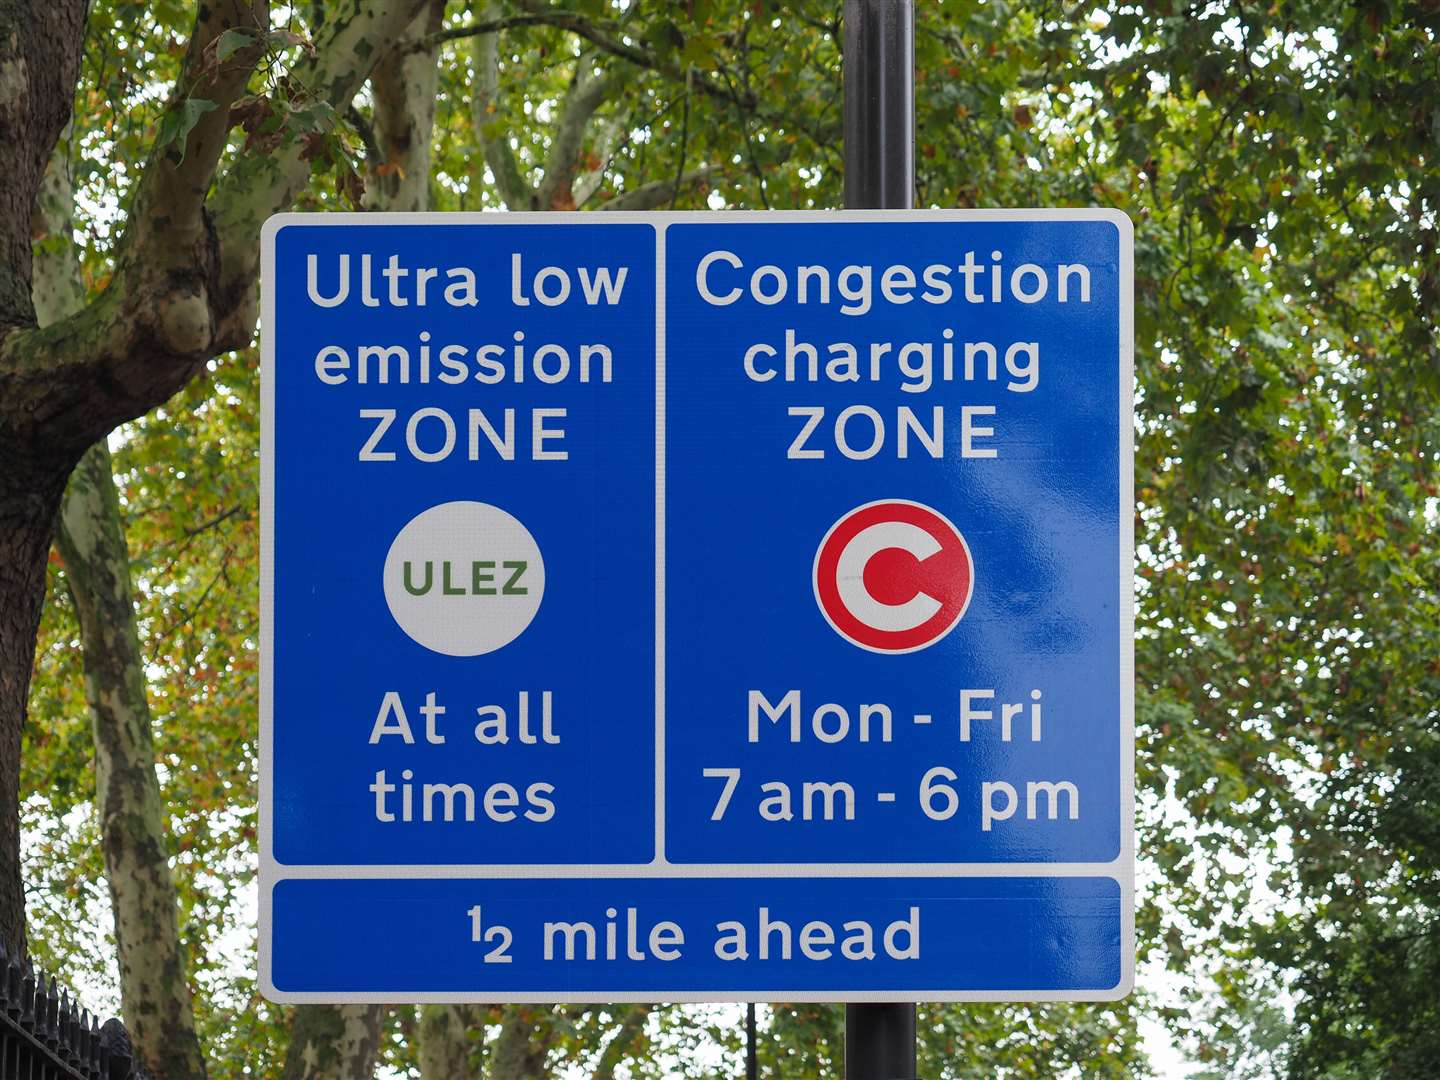 The Ulez operates all year round, with the exception of Christmas Day